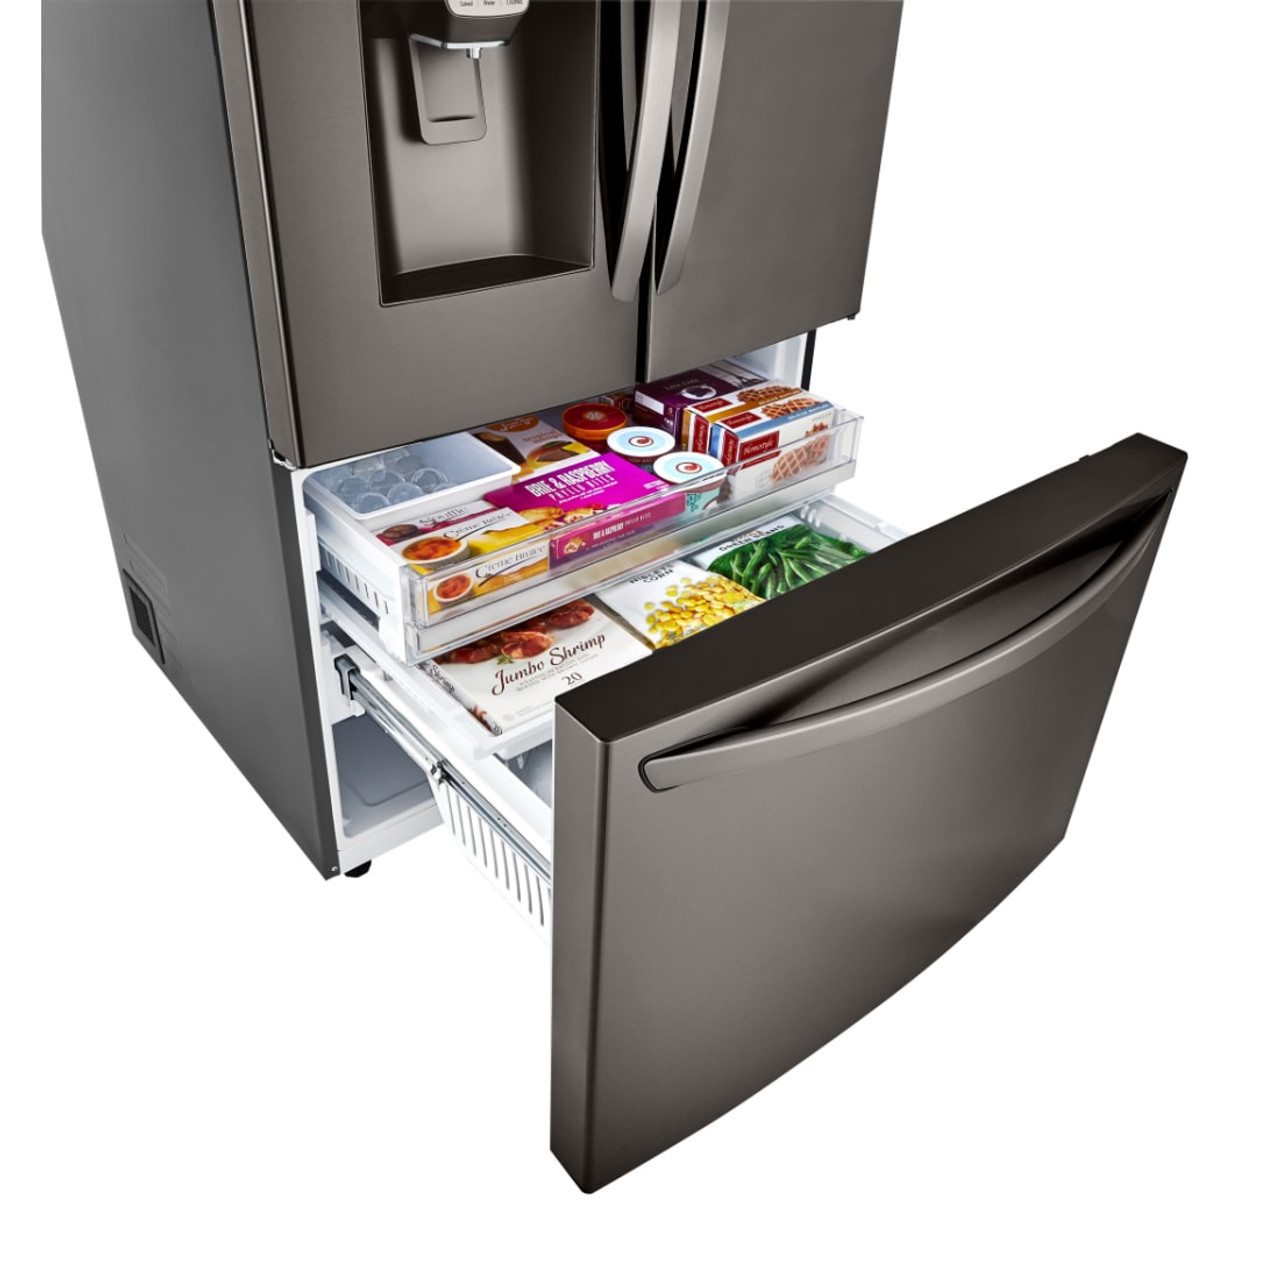 LG 24 cu. ft. Smart Wi-Fi Enabled Counter-Depth Refrigerator with Craft Ice Maker - LRFXC2416D